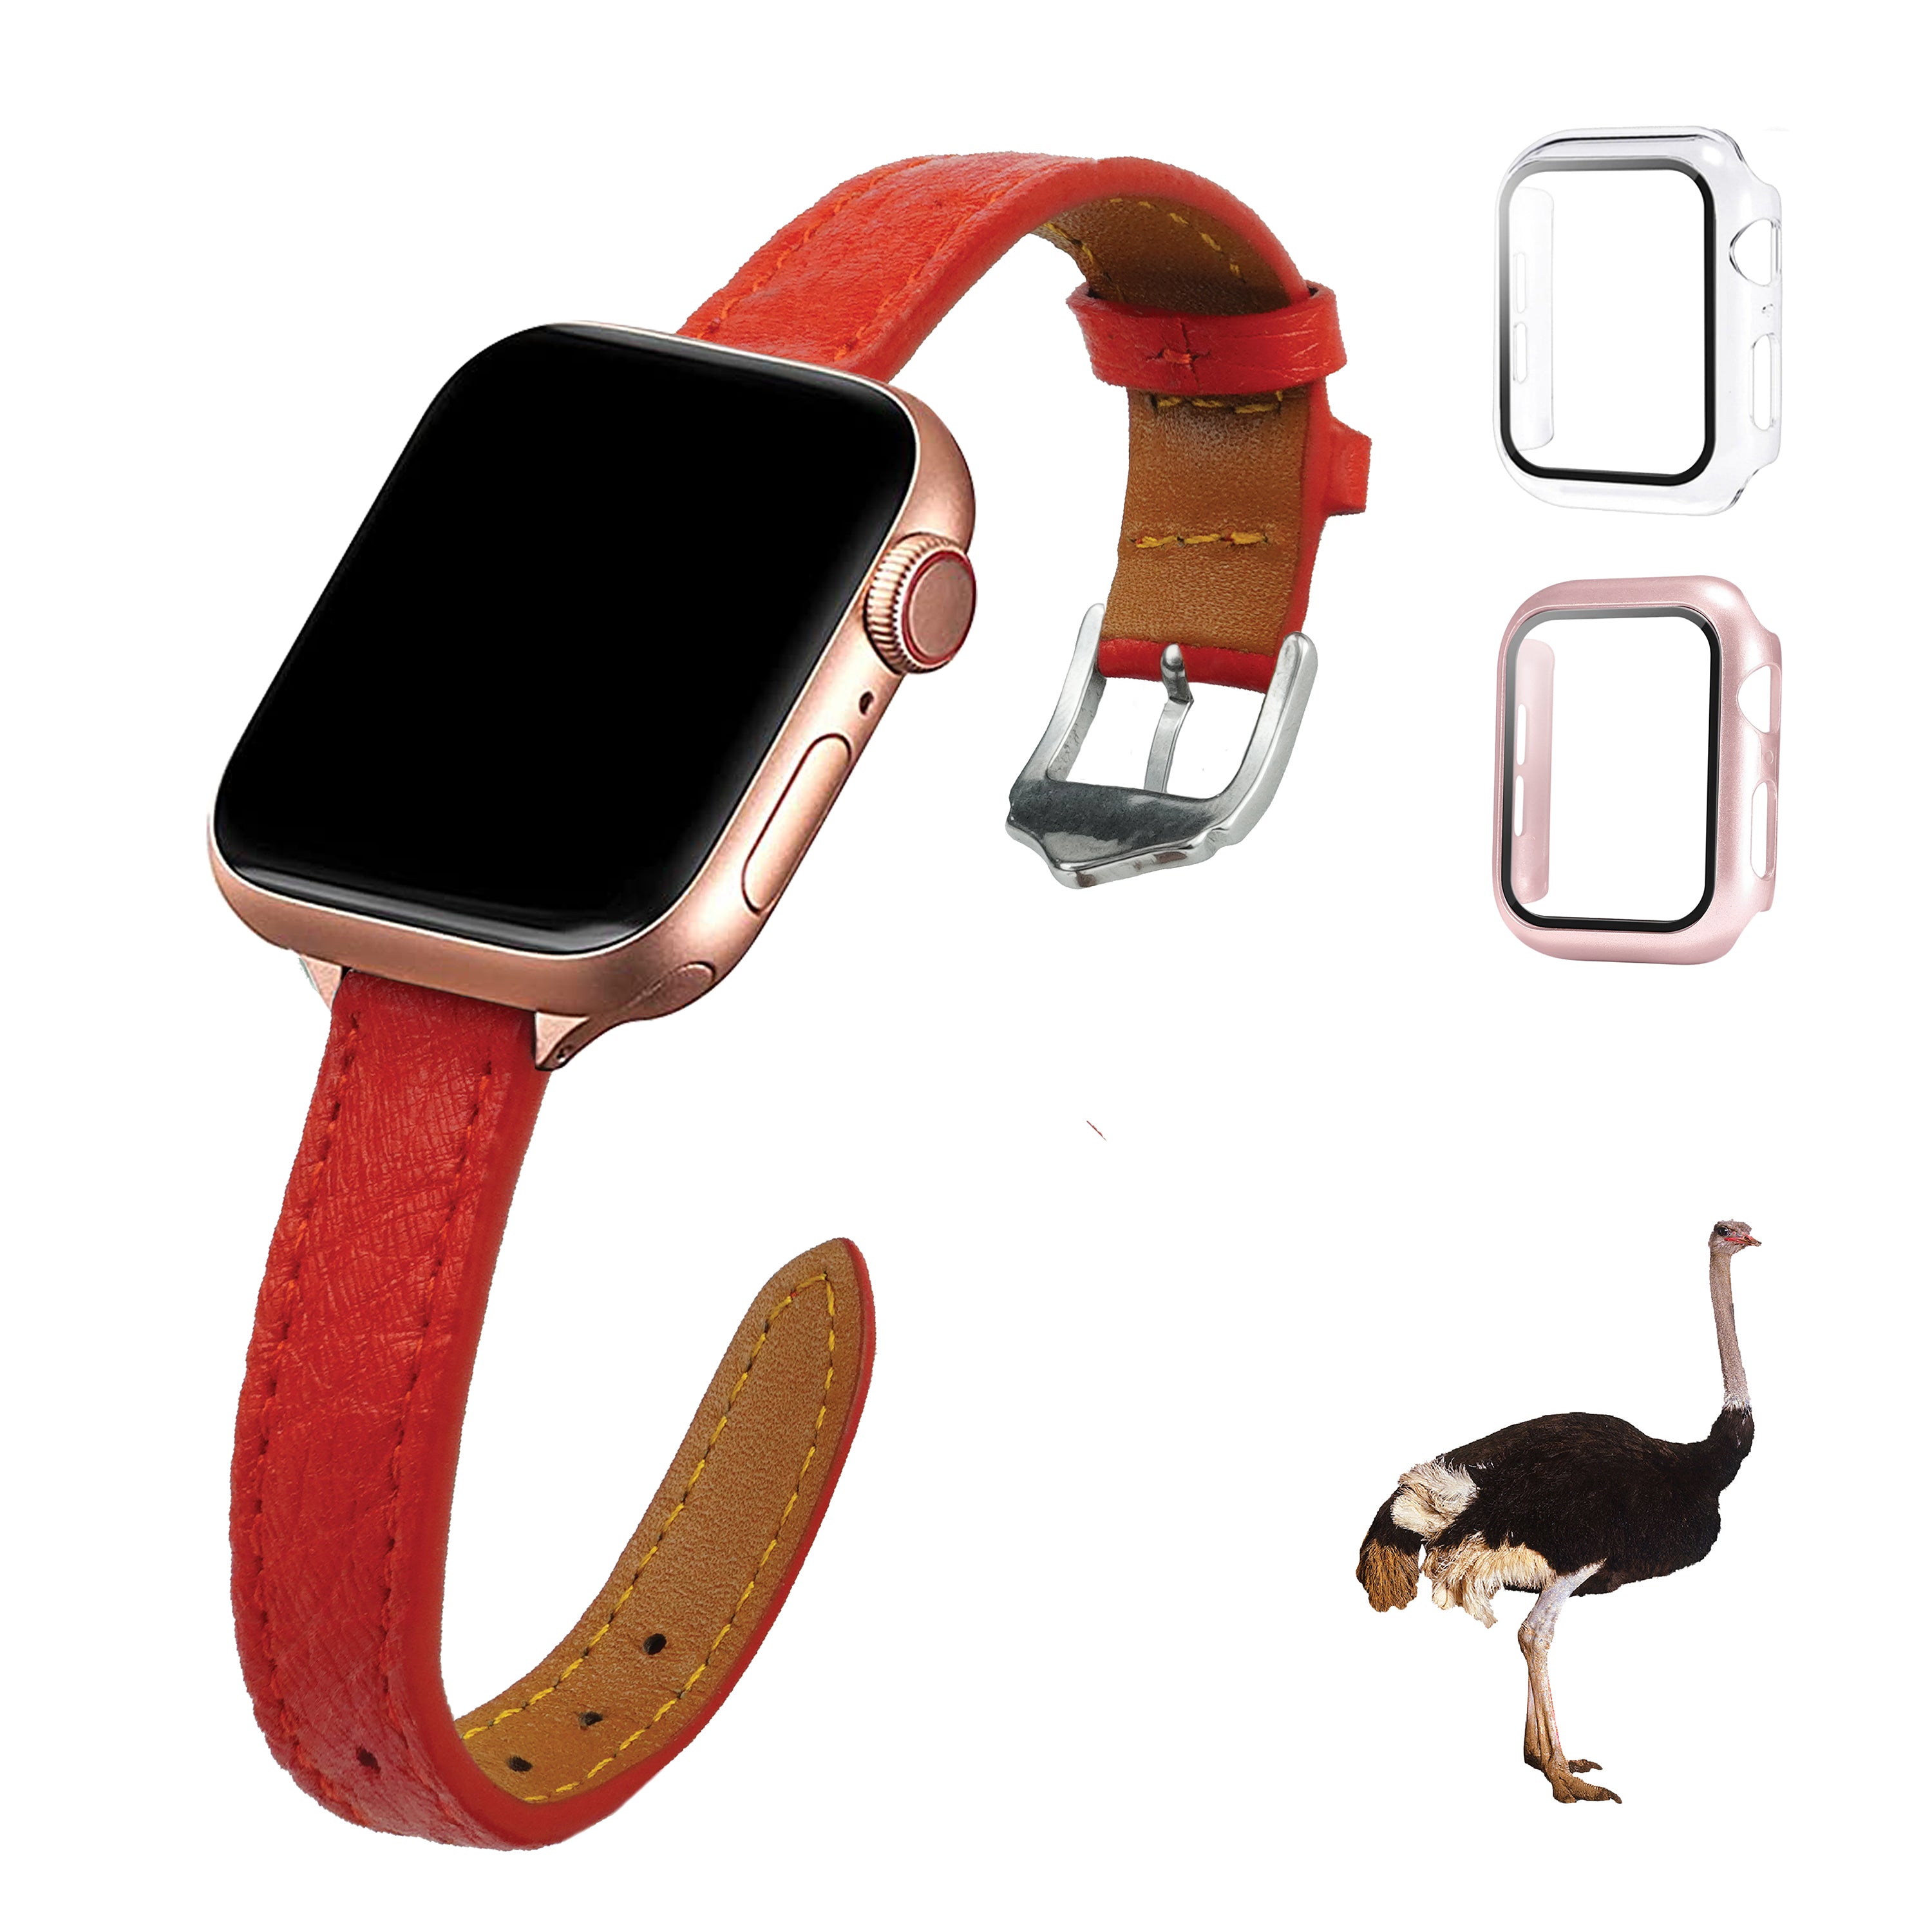 Red Flat Ostrich Leather Band Compatible Apple Watch Iwatch 44mm Screen Protector Case Silver Adapter Replacement Strap For Smartwatch Series 4 5 6 SE Leather Handmade AW-190S-W-44MM